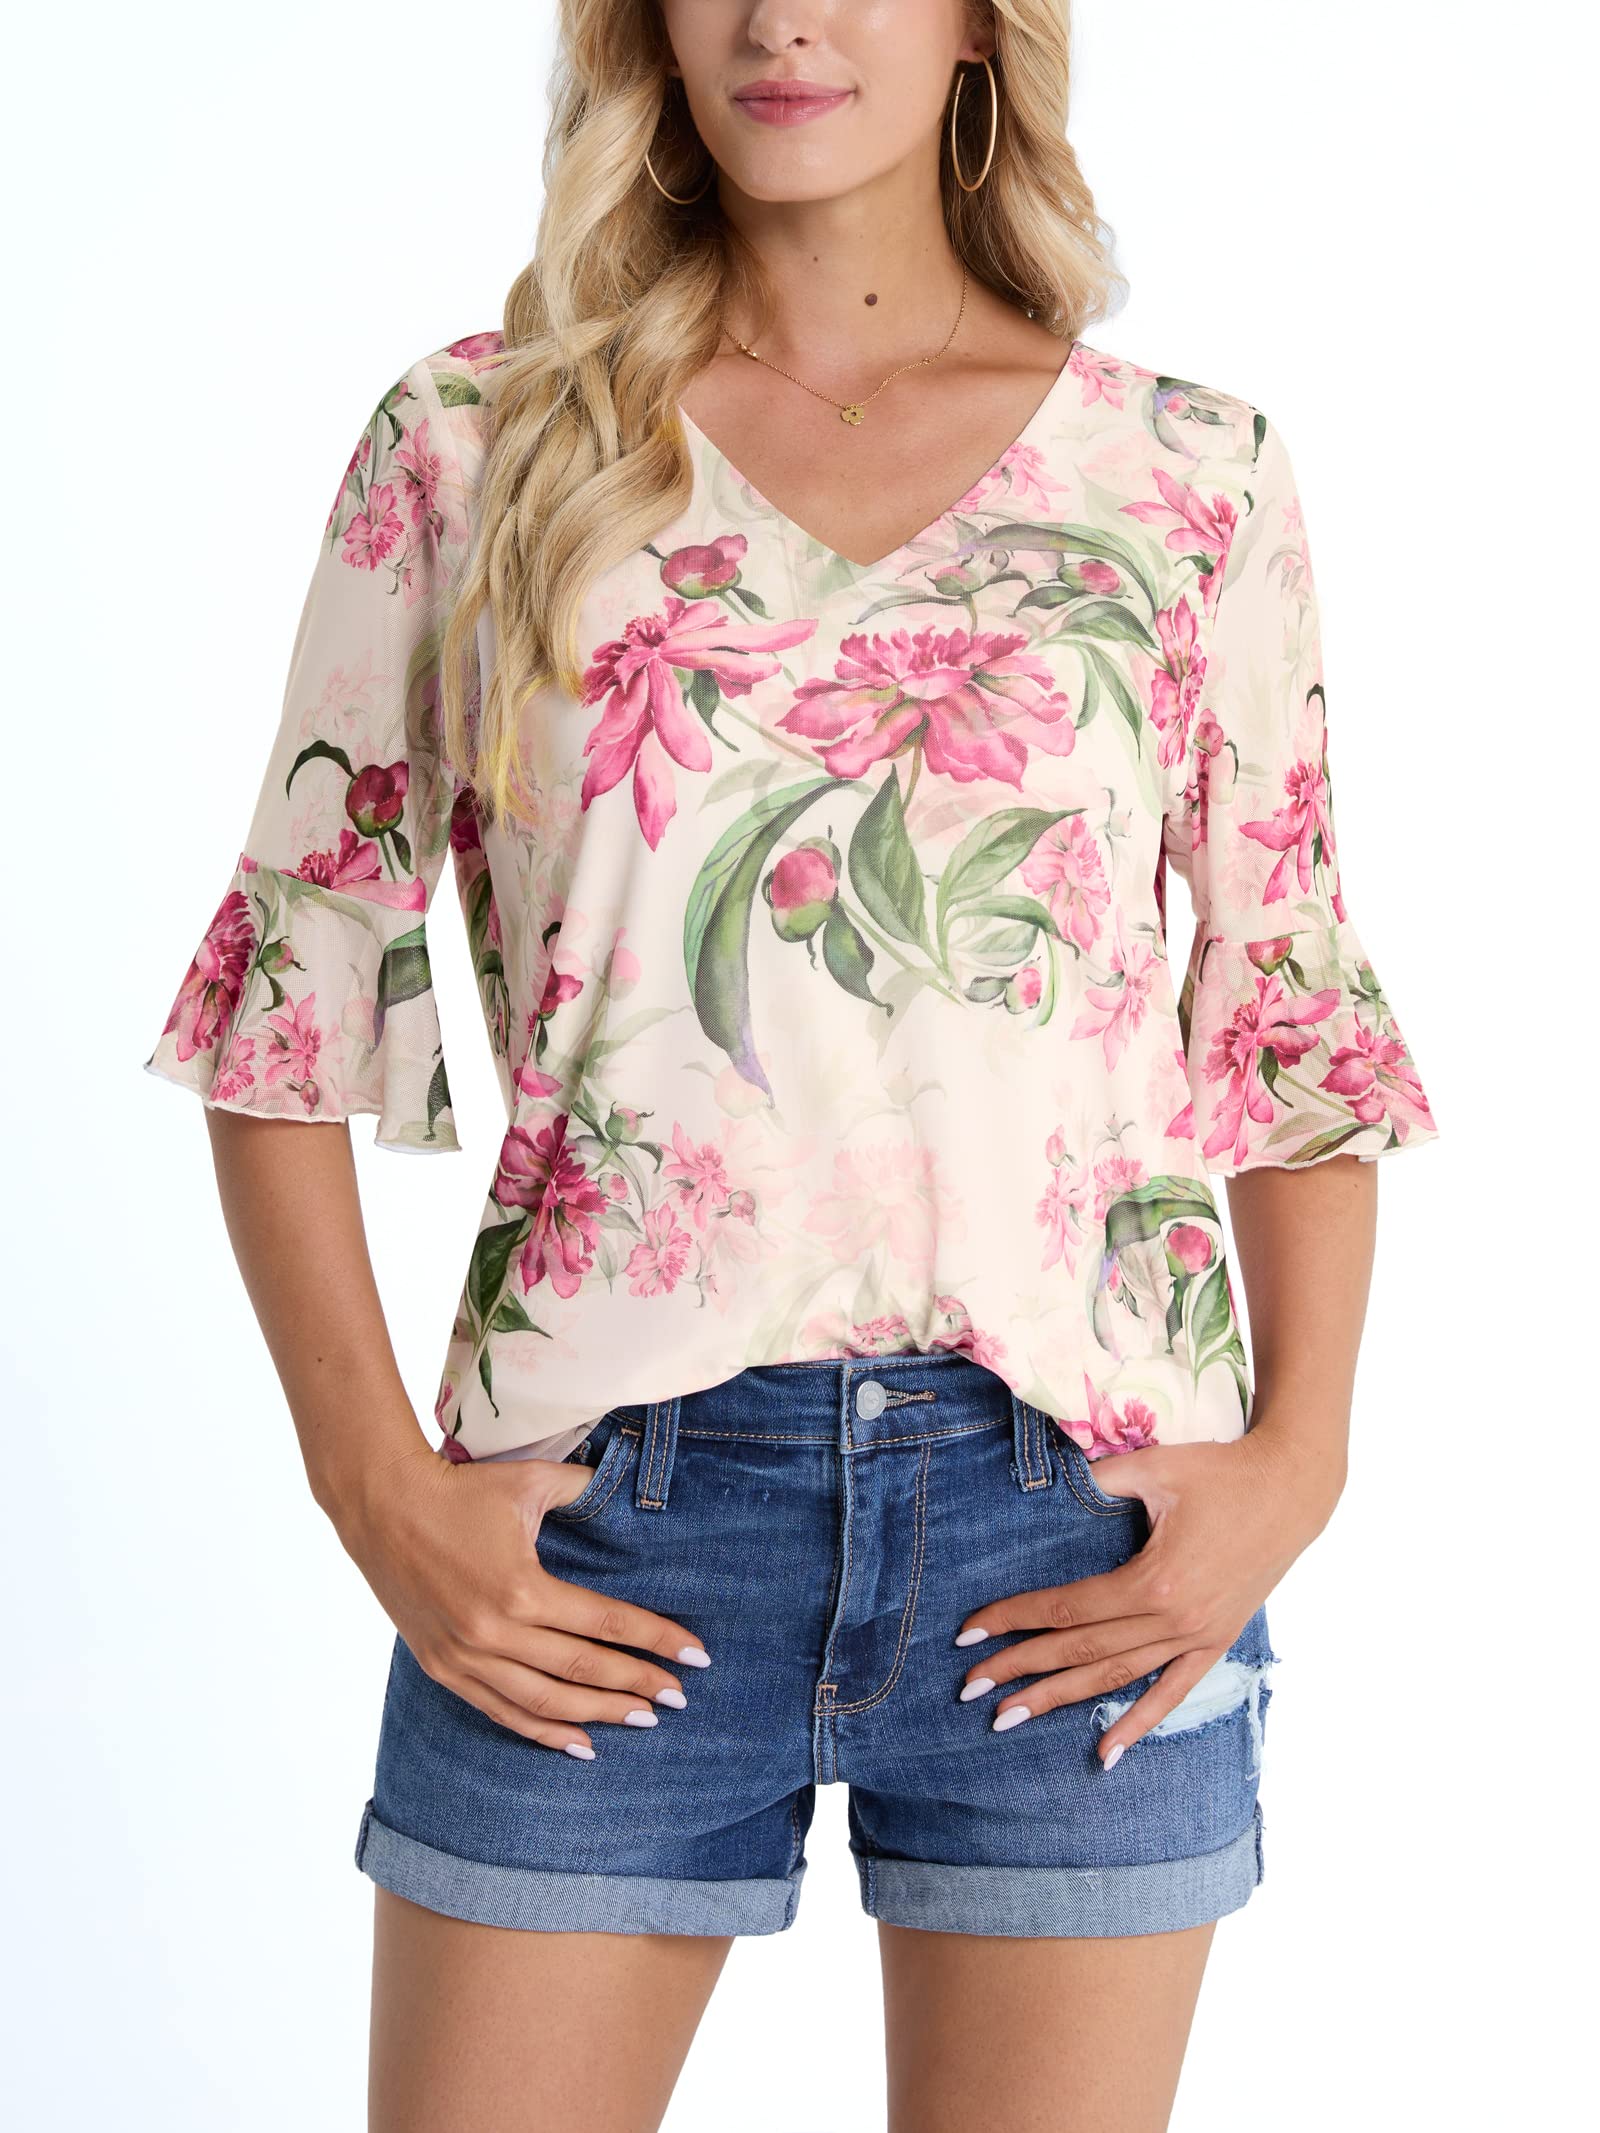 BAISHENGGT Peony Print Women's Summer Casual V Neck Ruffle Bell Sleeve Blouse Tops Loose Comfy T Shirt